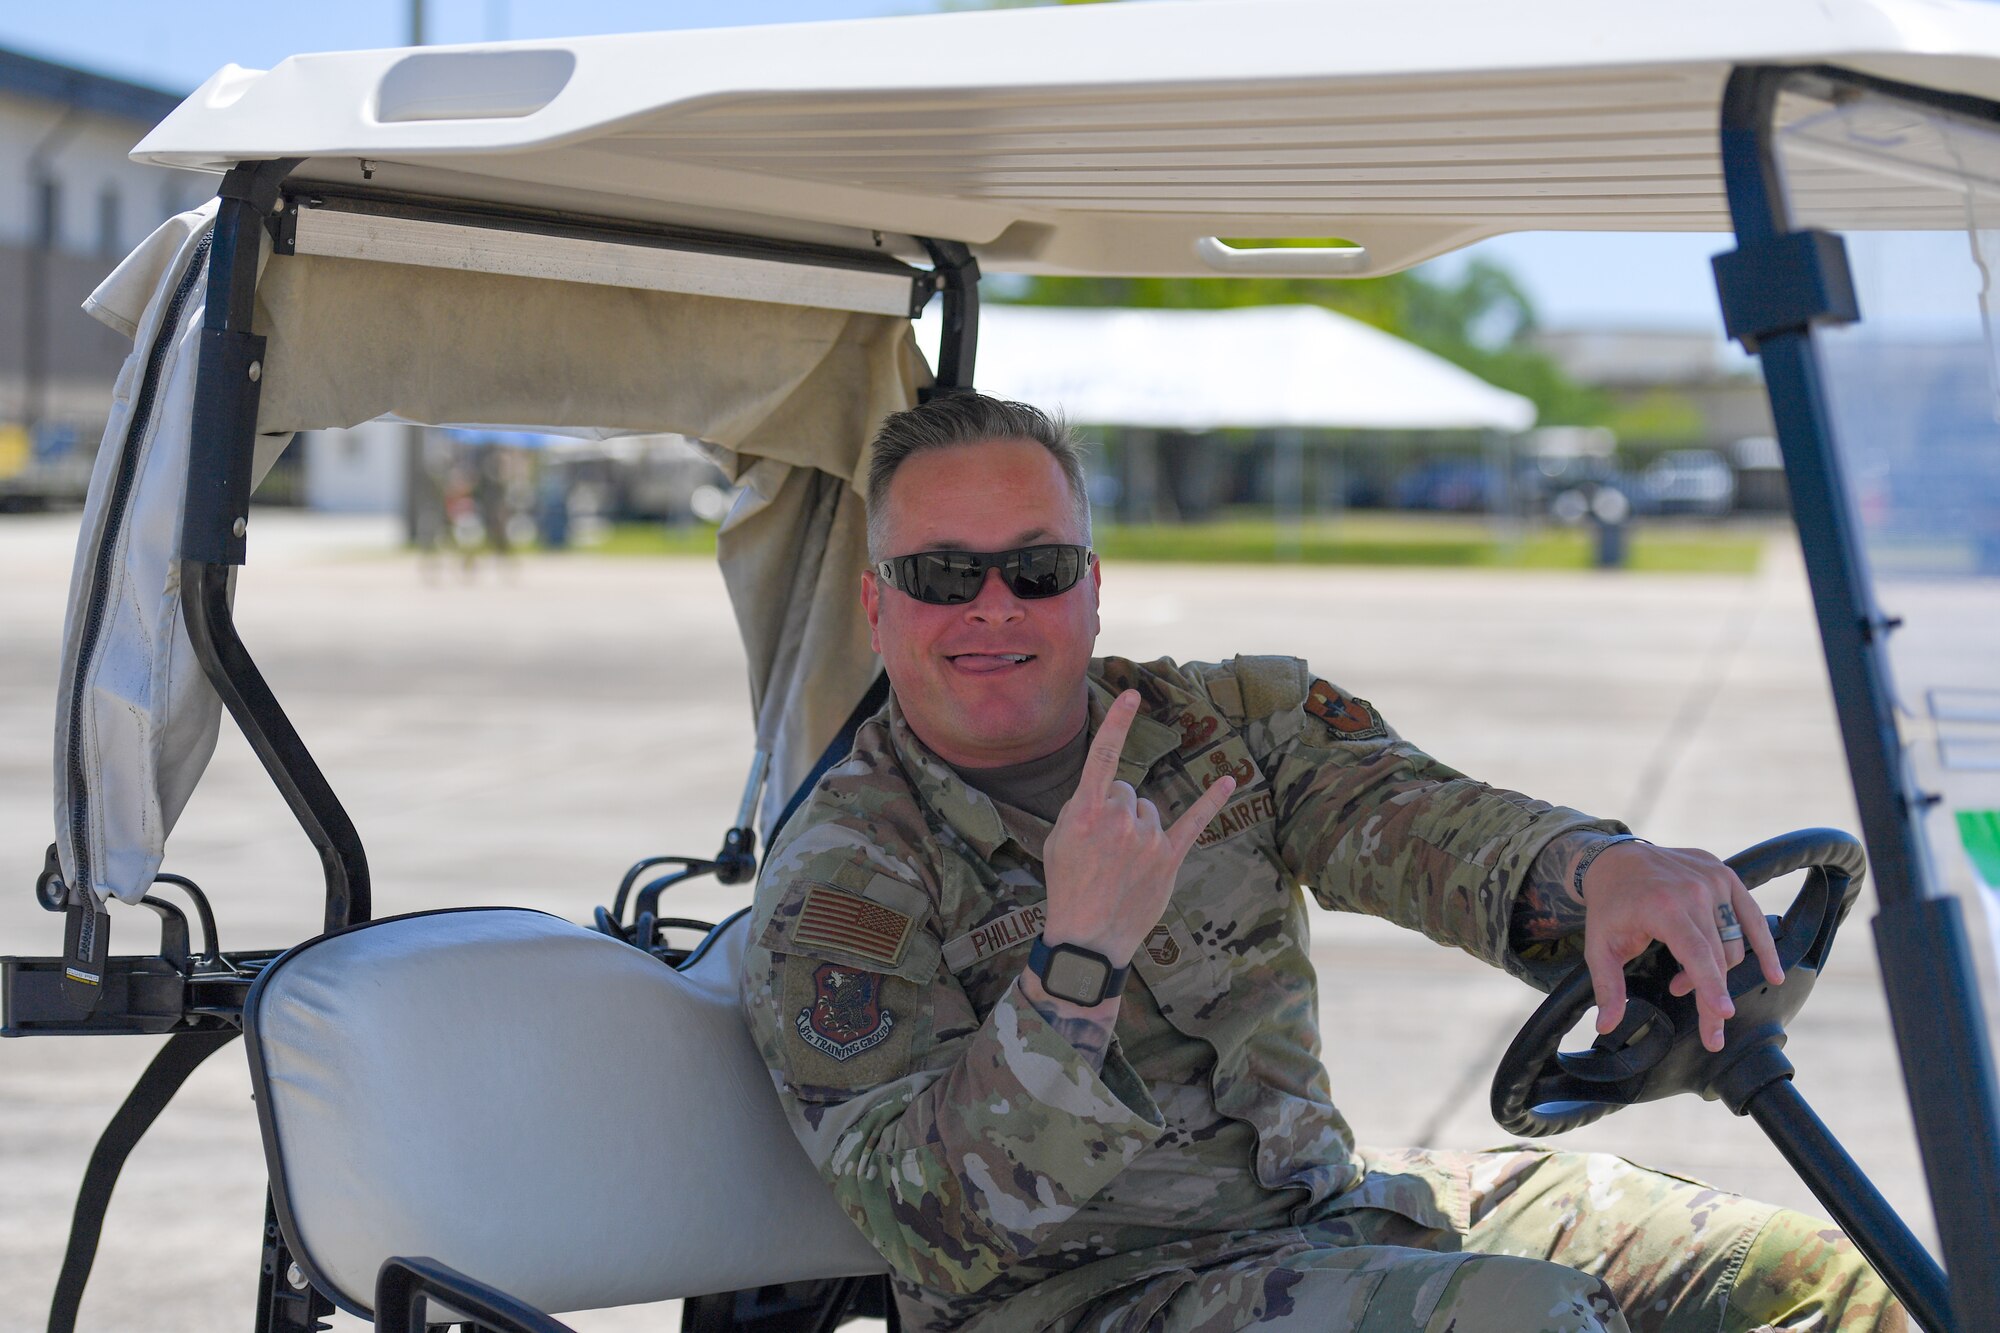 U.S. Air Force Chief Master Sgt. Jeremy Phillips, 81st Training Group senior enlisted leader, drives a golf cart during the 2023 Thunder Over the Sound Air and Space Show at Keesler Air Force Base, Mississippi, April 28, 2023. Thunder Over the Sound is a unique event where a military installation and its surrounding city jointly host an air show in two locations; Biloxi Beach and Keesler's flightline. (U.S. Air Force photo by Kemberly Groue)